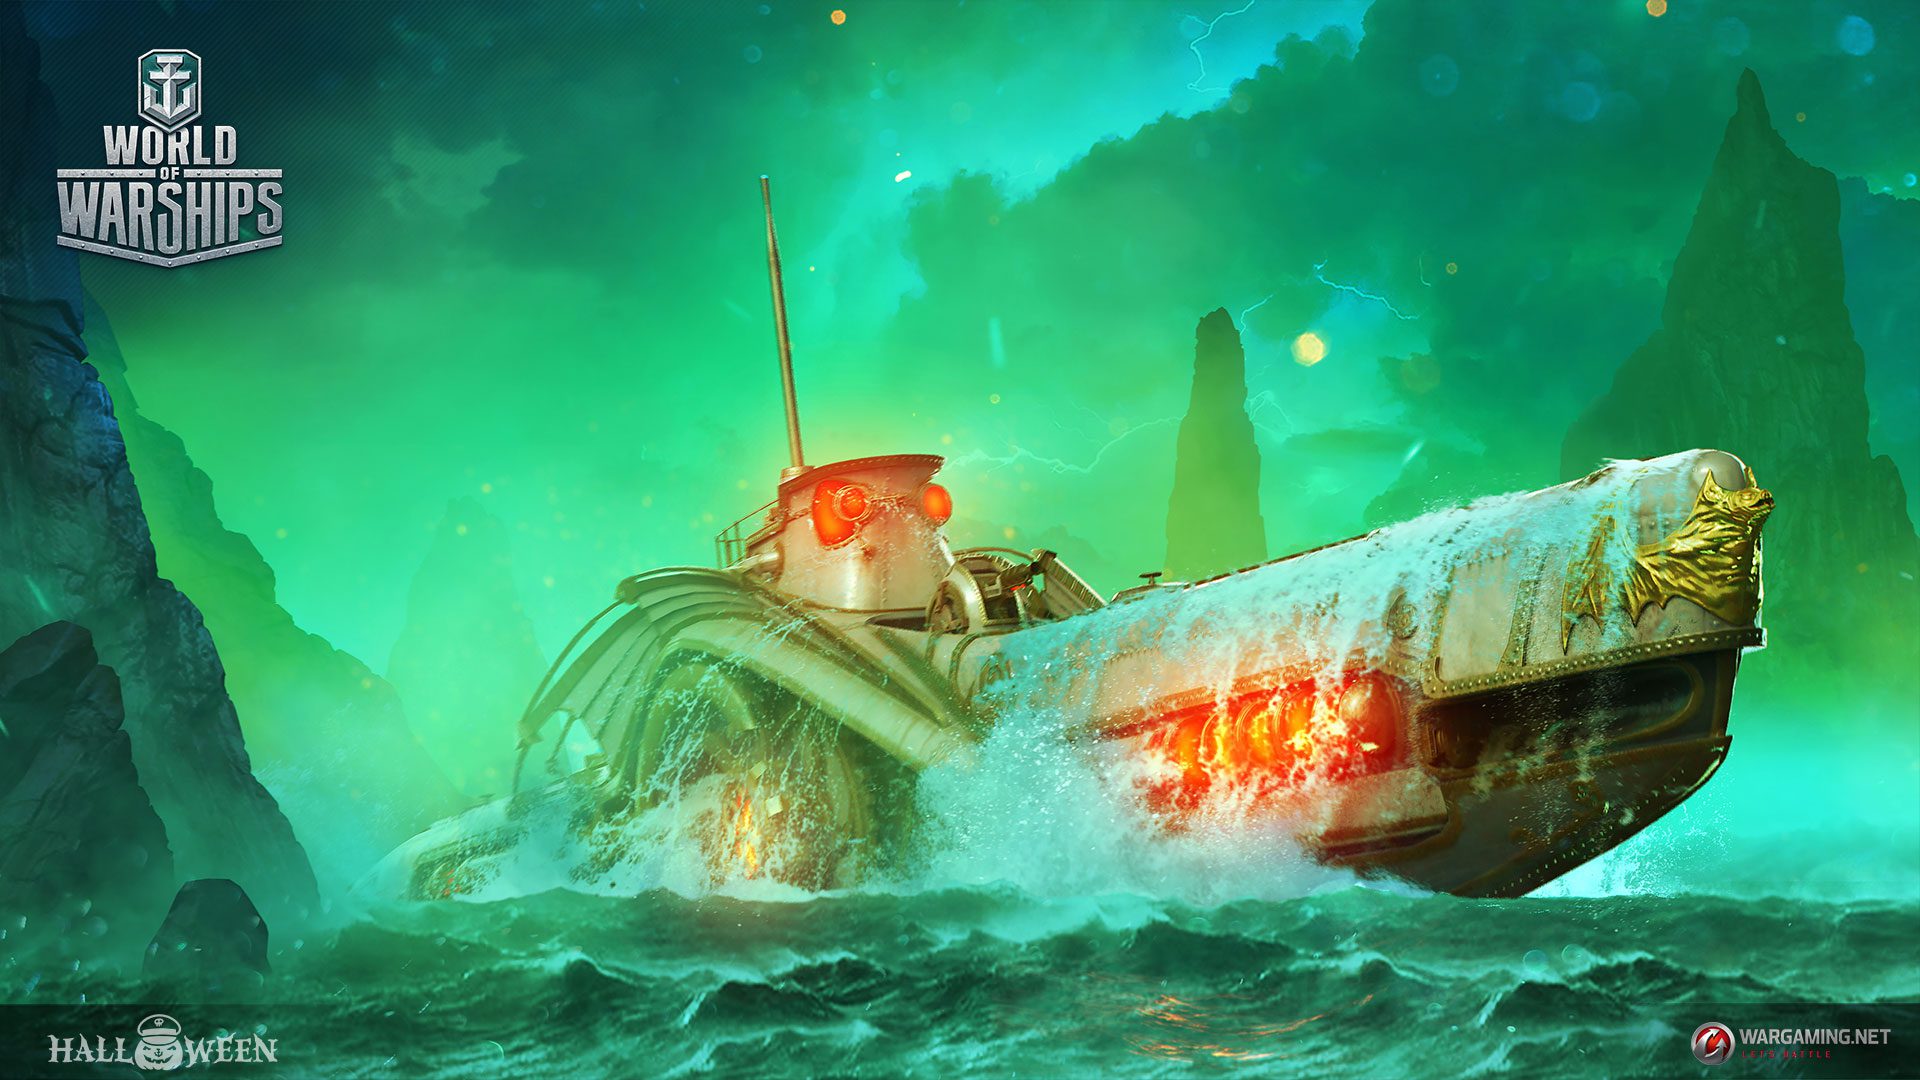 Sinister Submarines Stalk the Seas in World of Warships Starting Today